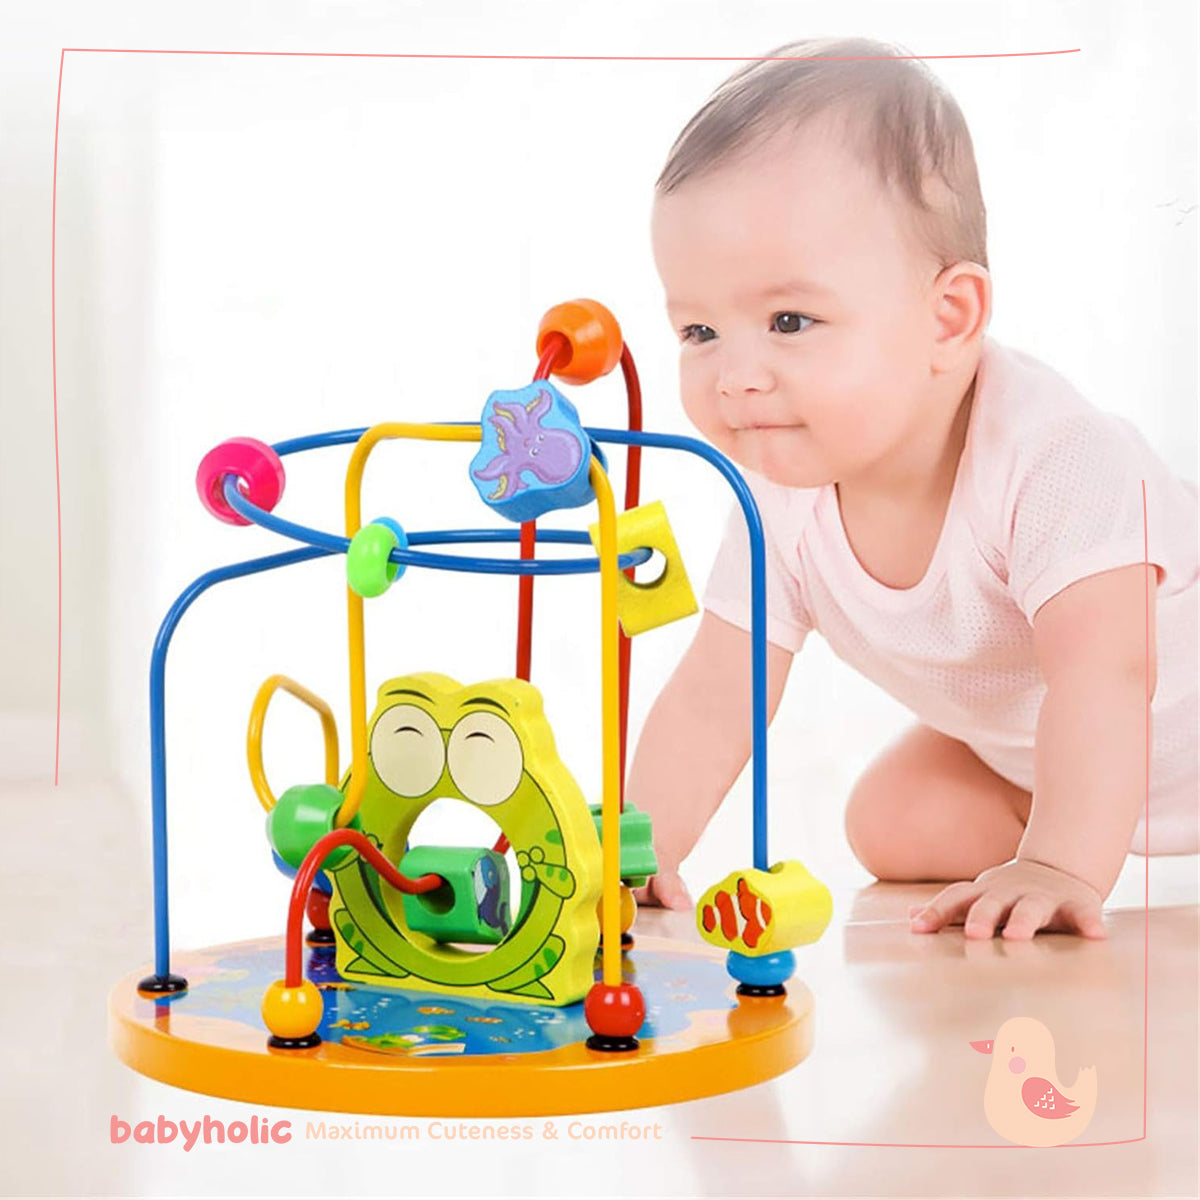 Wooden Activity Cube 8 in 1